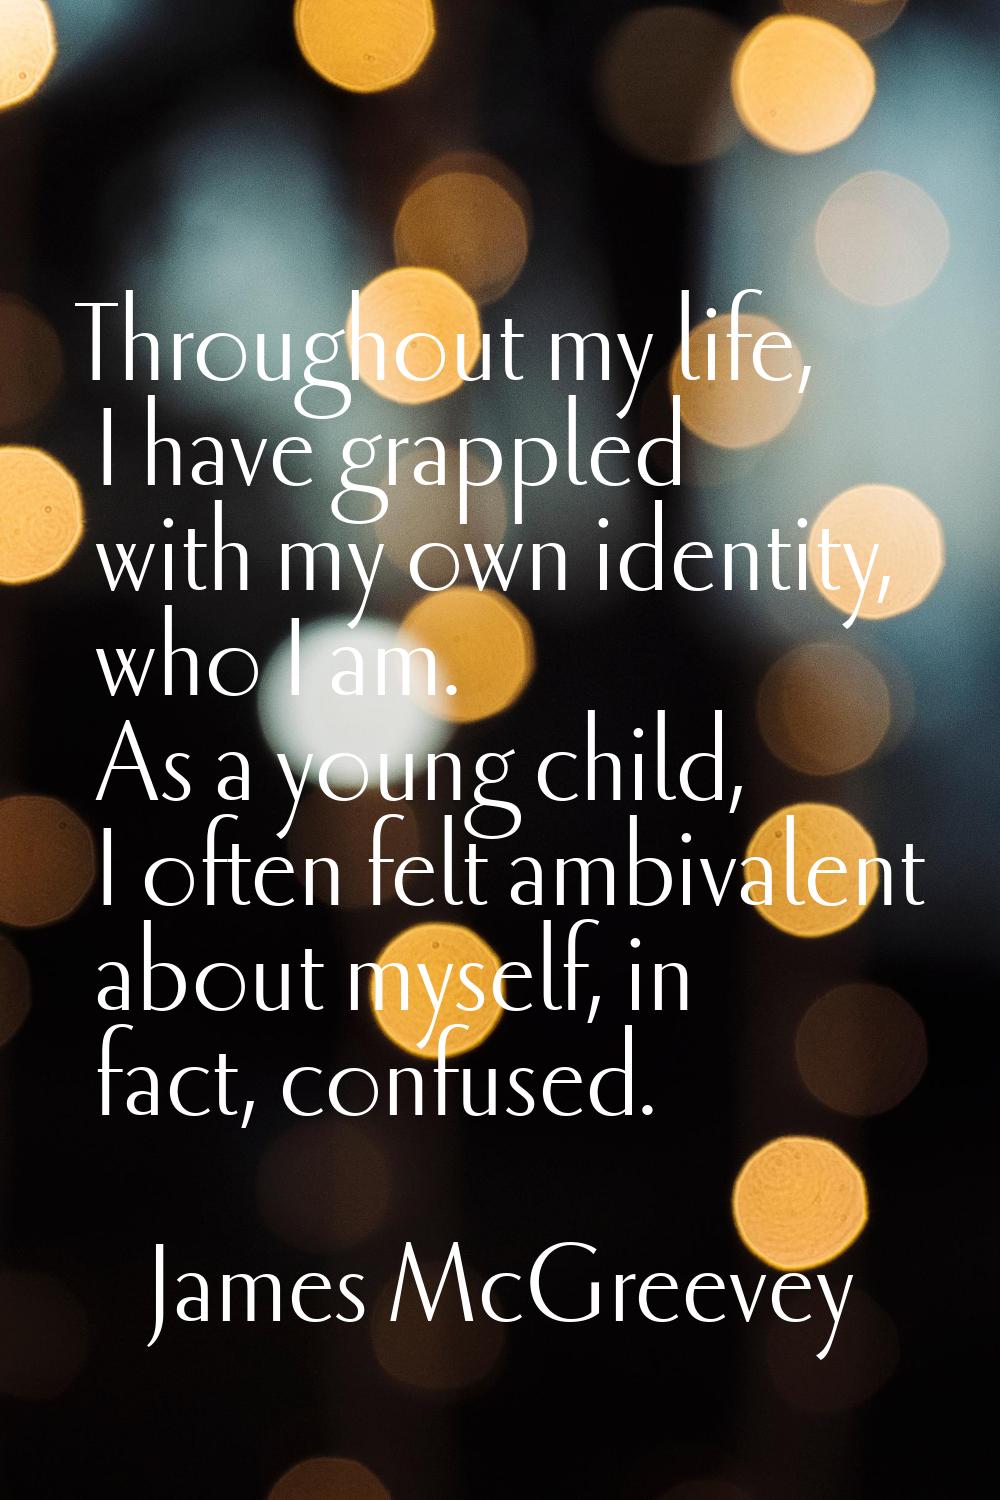 Throughout my life, I have grappled with my own identity, who I am. As a young child, I often felt 